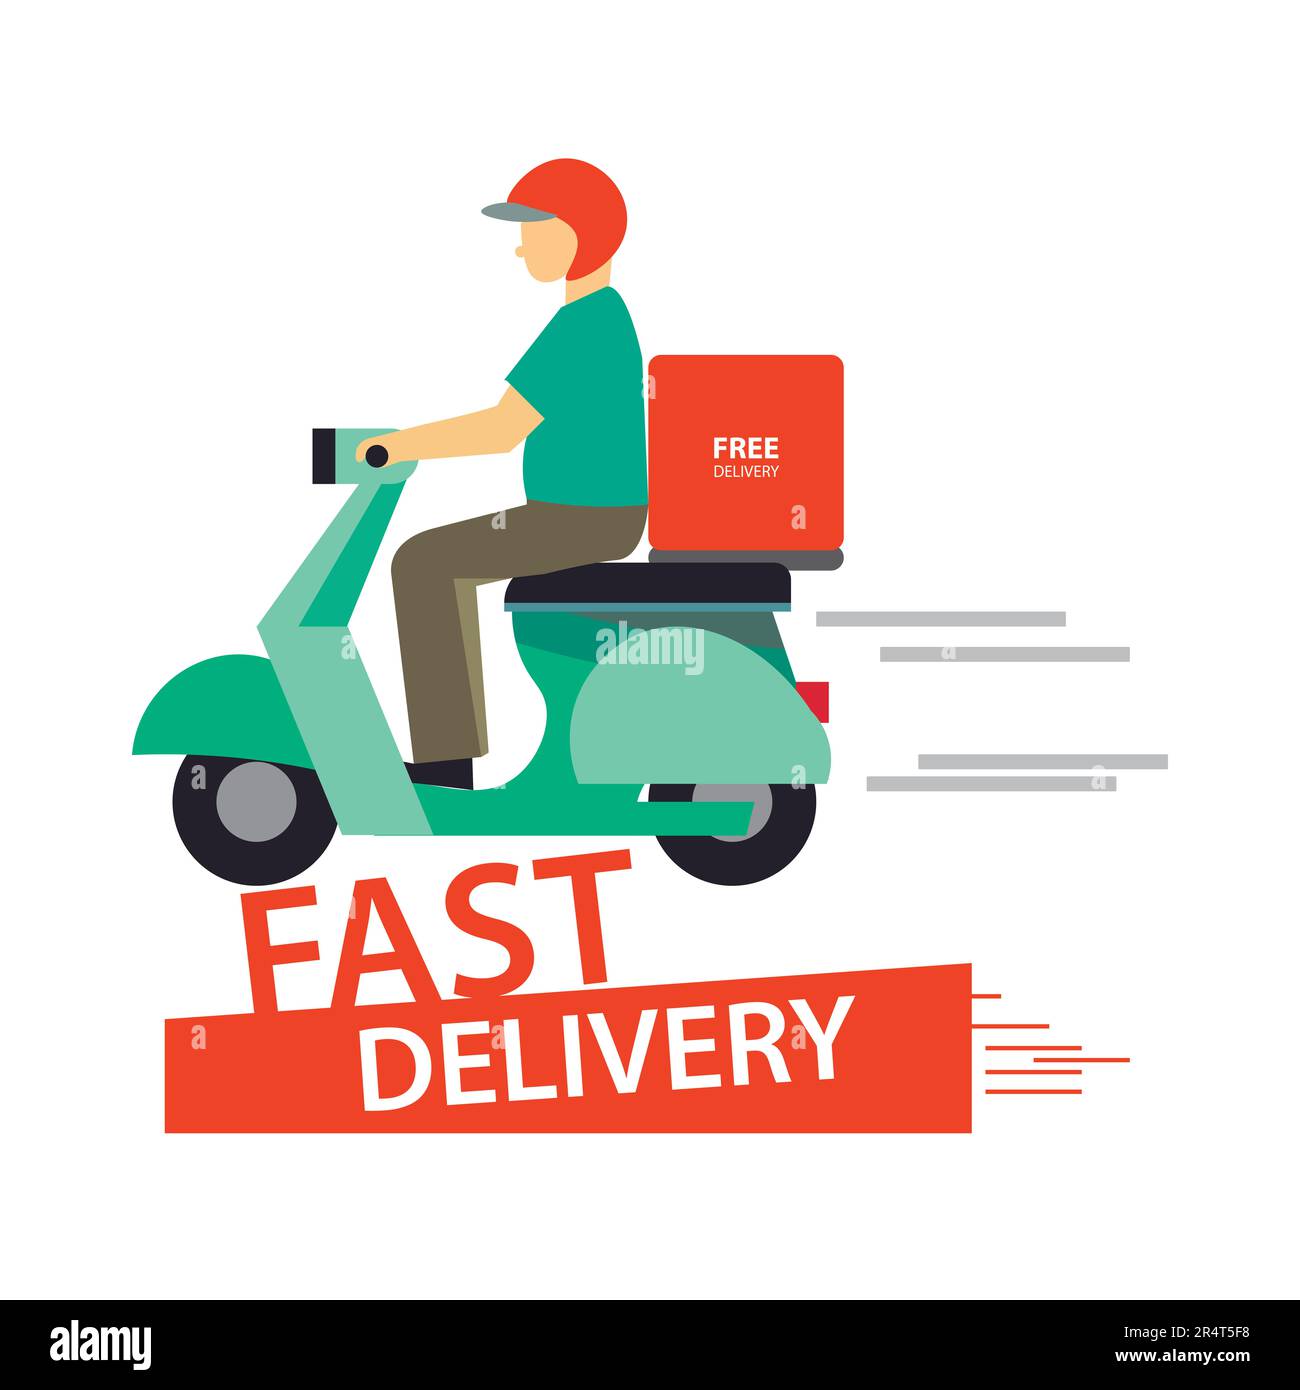 https://c8.alamy.com/comp/2R4T5F8/delivery-man-on-the-scooter-bike-vector-2R4T5F8.jpg